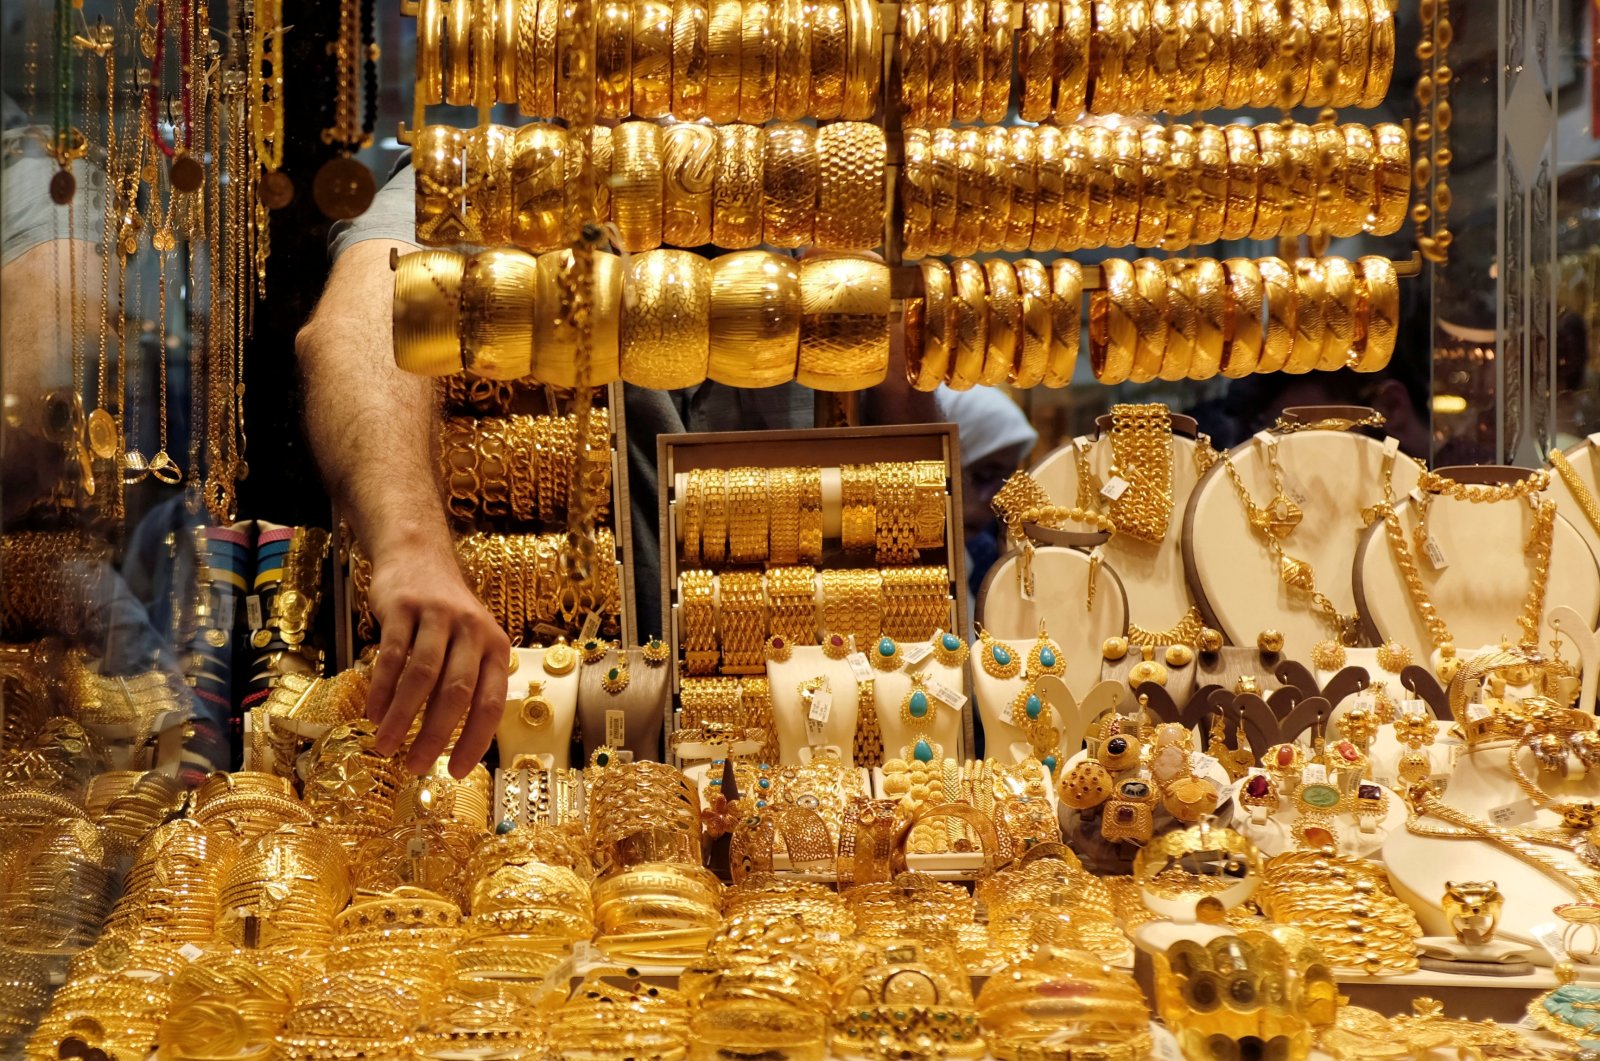 A goldsmith arranges golden bangles at a jewelry shop in Istanbul, Türkiye, July 25, 2019. (Reuters Photo)